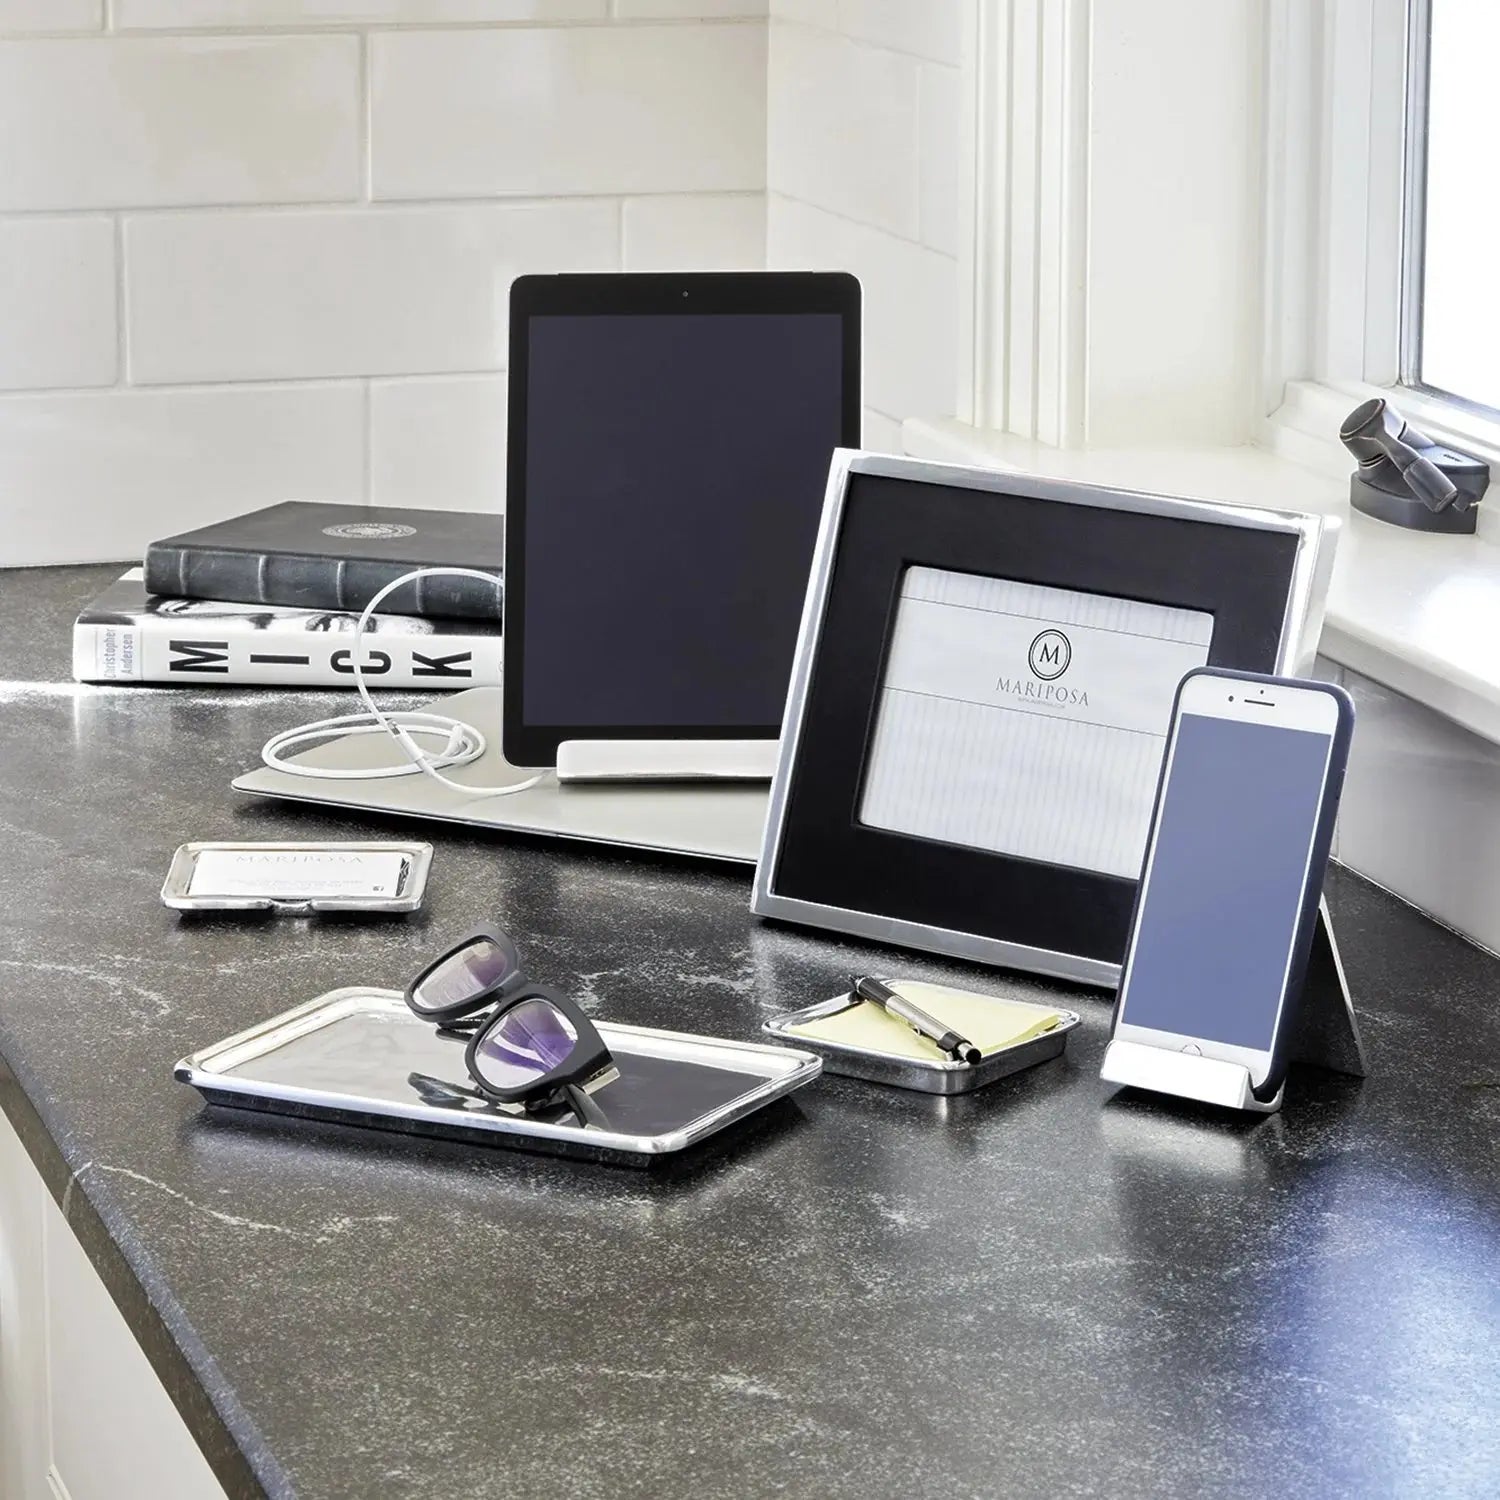 Mariposa Silver Signature Phone Holder with a phone set on a black marble desk, alongside a metal tray with glass, tablet and picture frame and books.